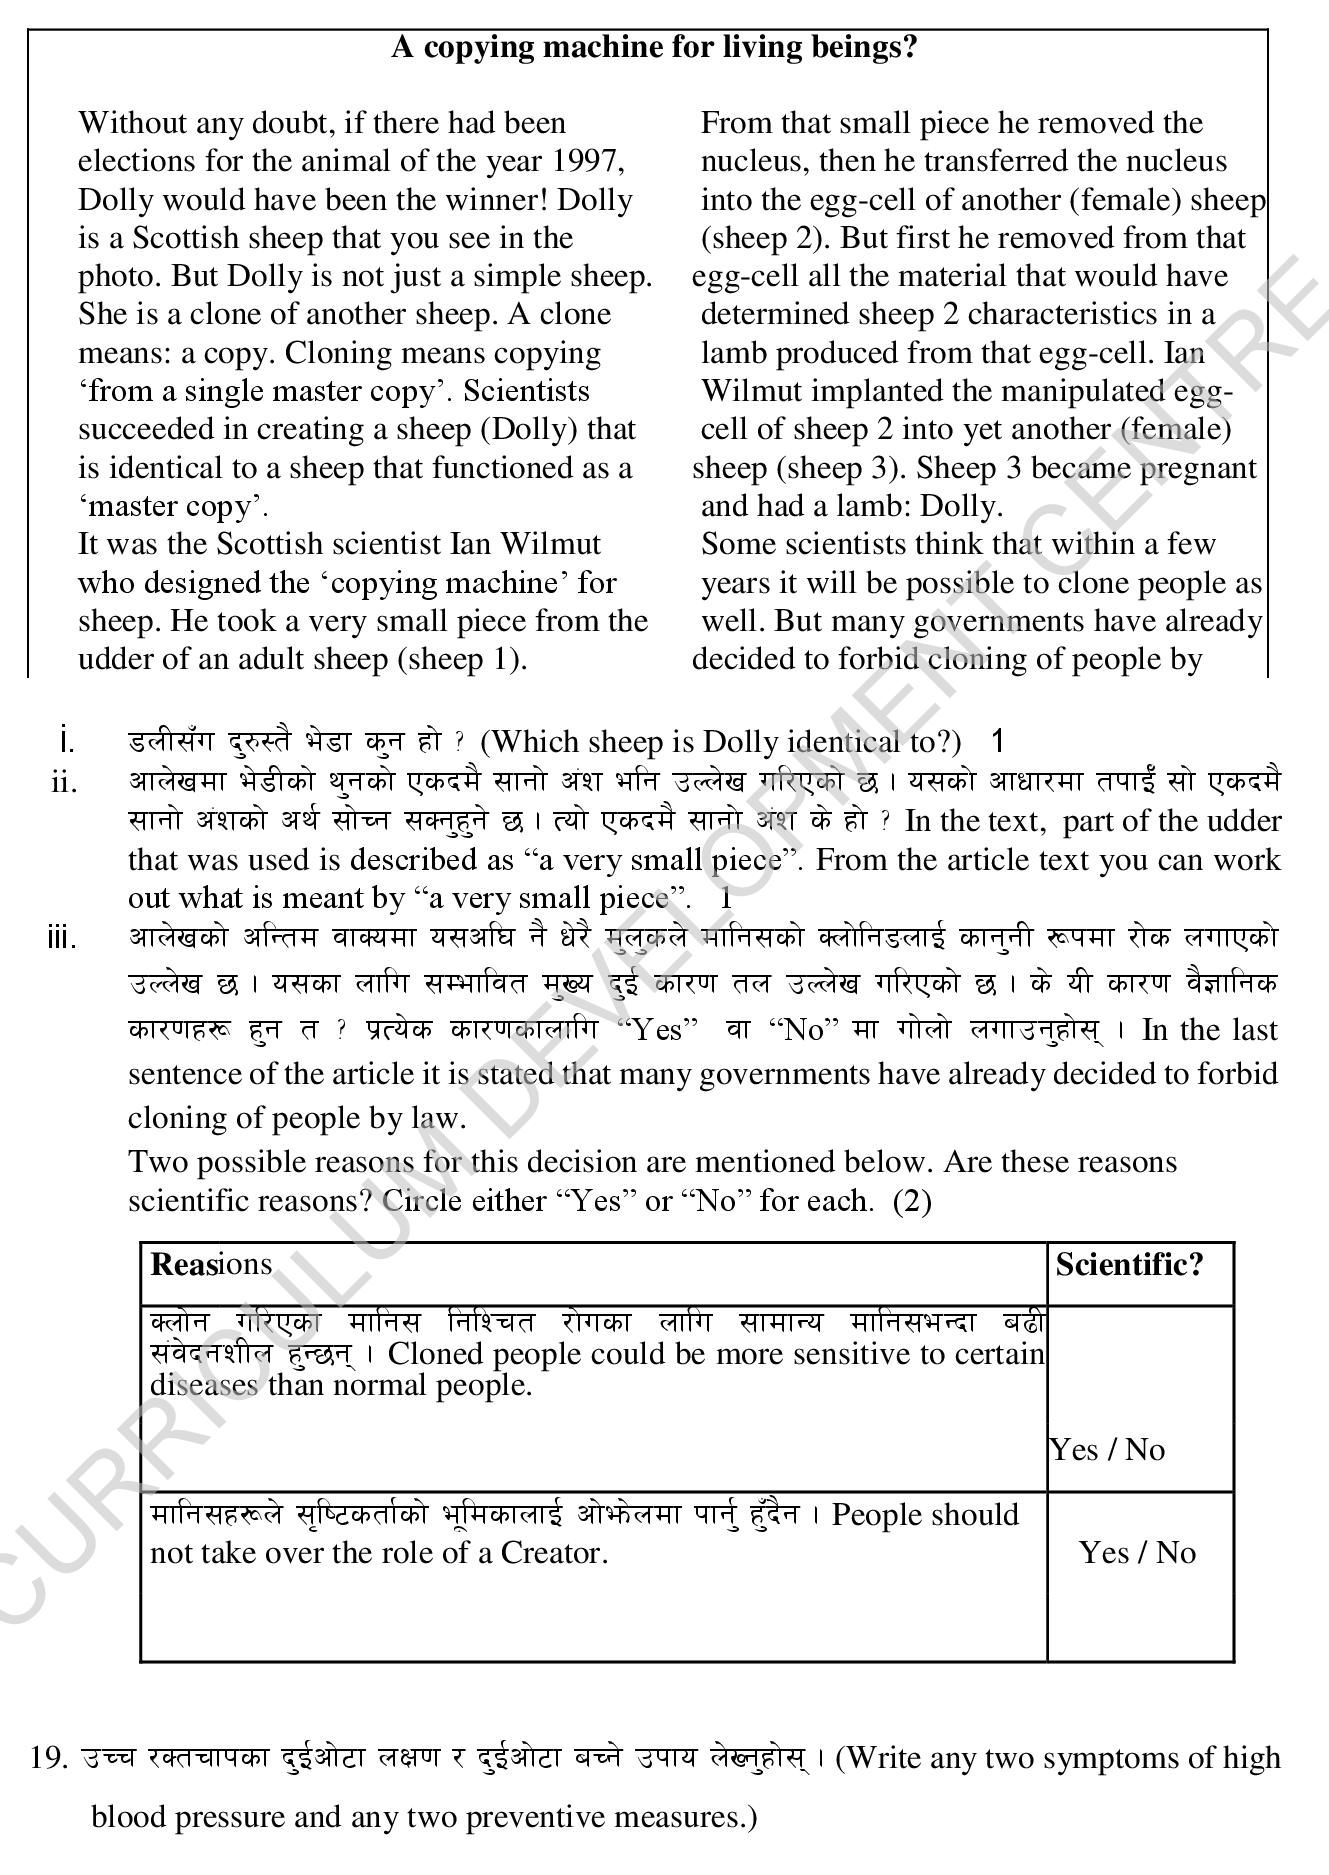 SEE Class 10 Science Model Question 2080